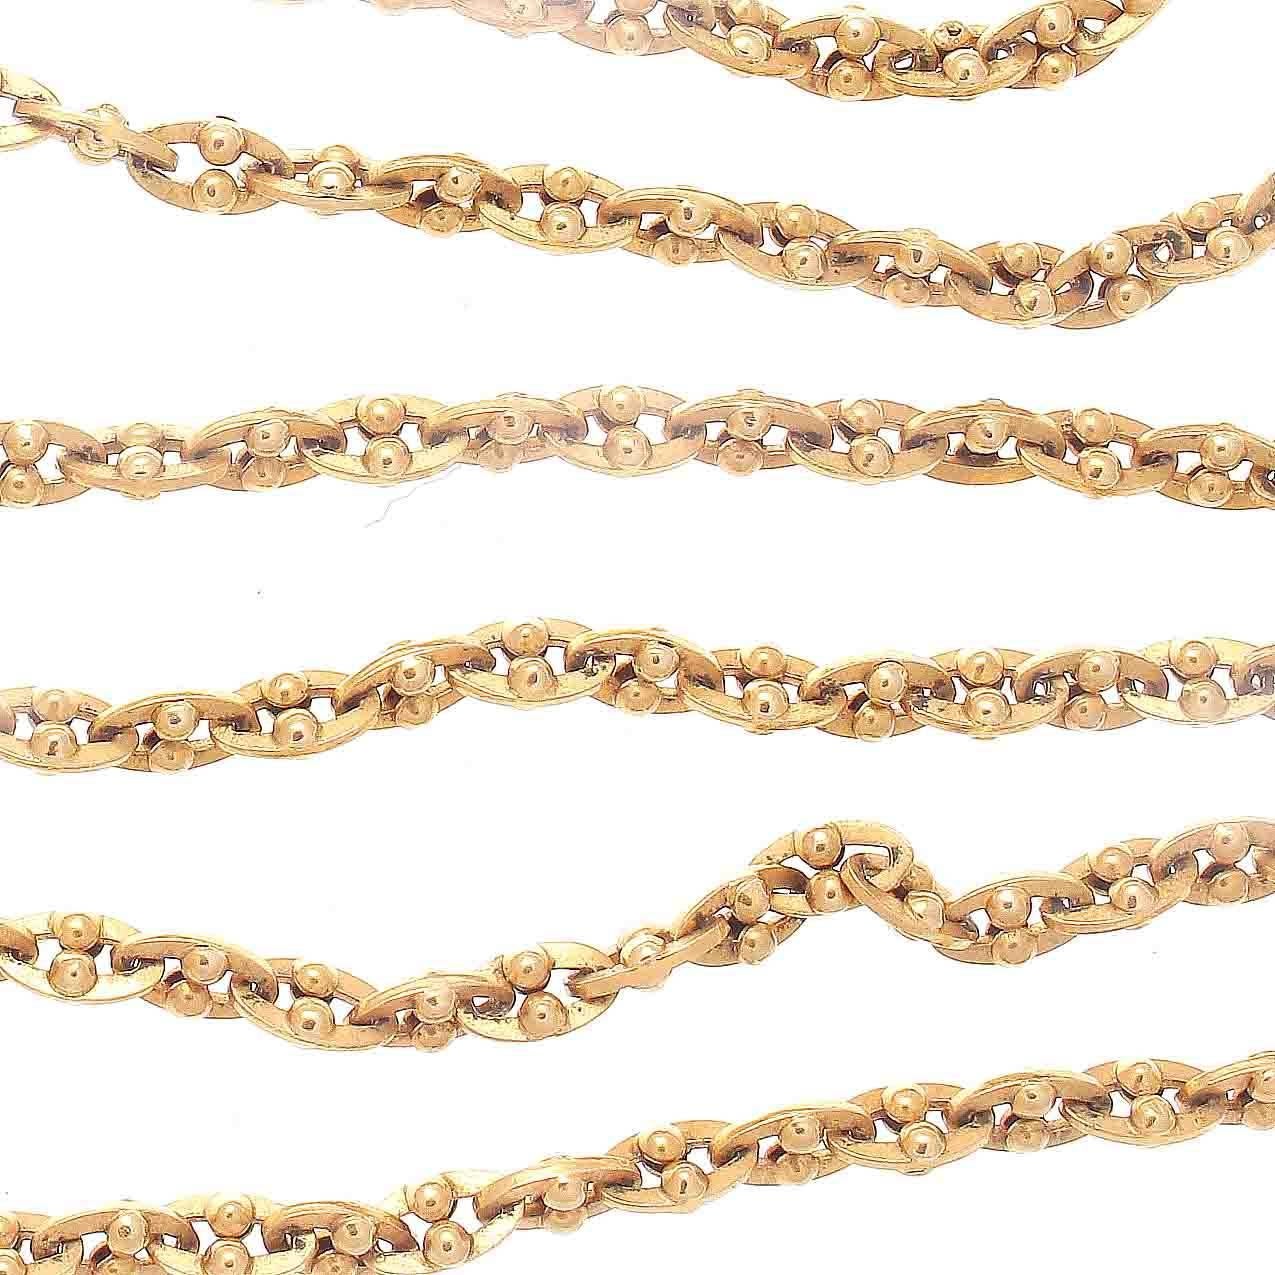 Classic and creative design that allows the wearer flexibility in how it's worn. Long enough to quadruple wrap, triple wrap, double wrap or just wear as a long single chain. Constructed with intricate links of 18k gold interlocking together. 